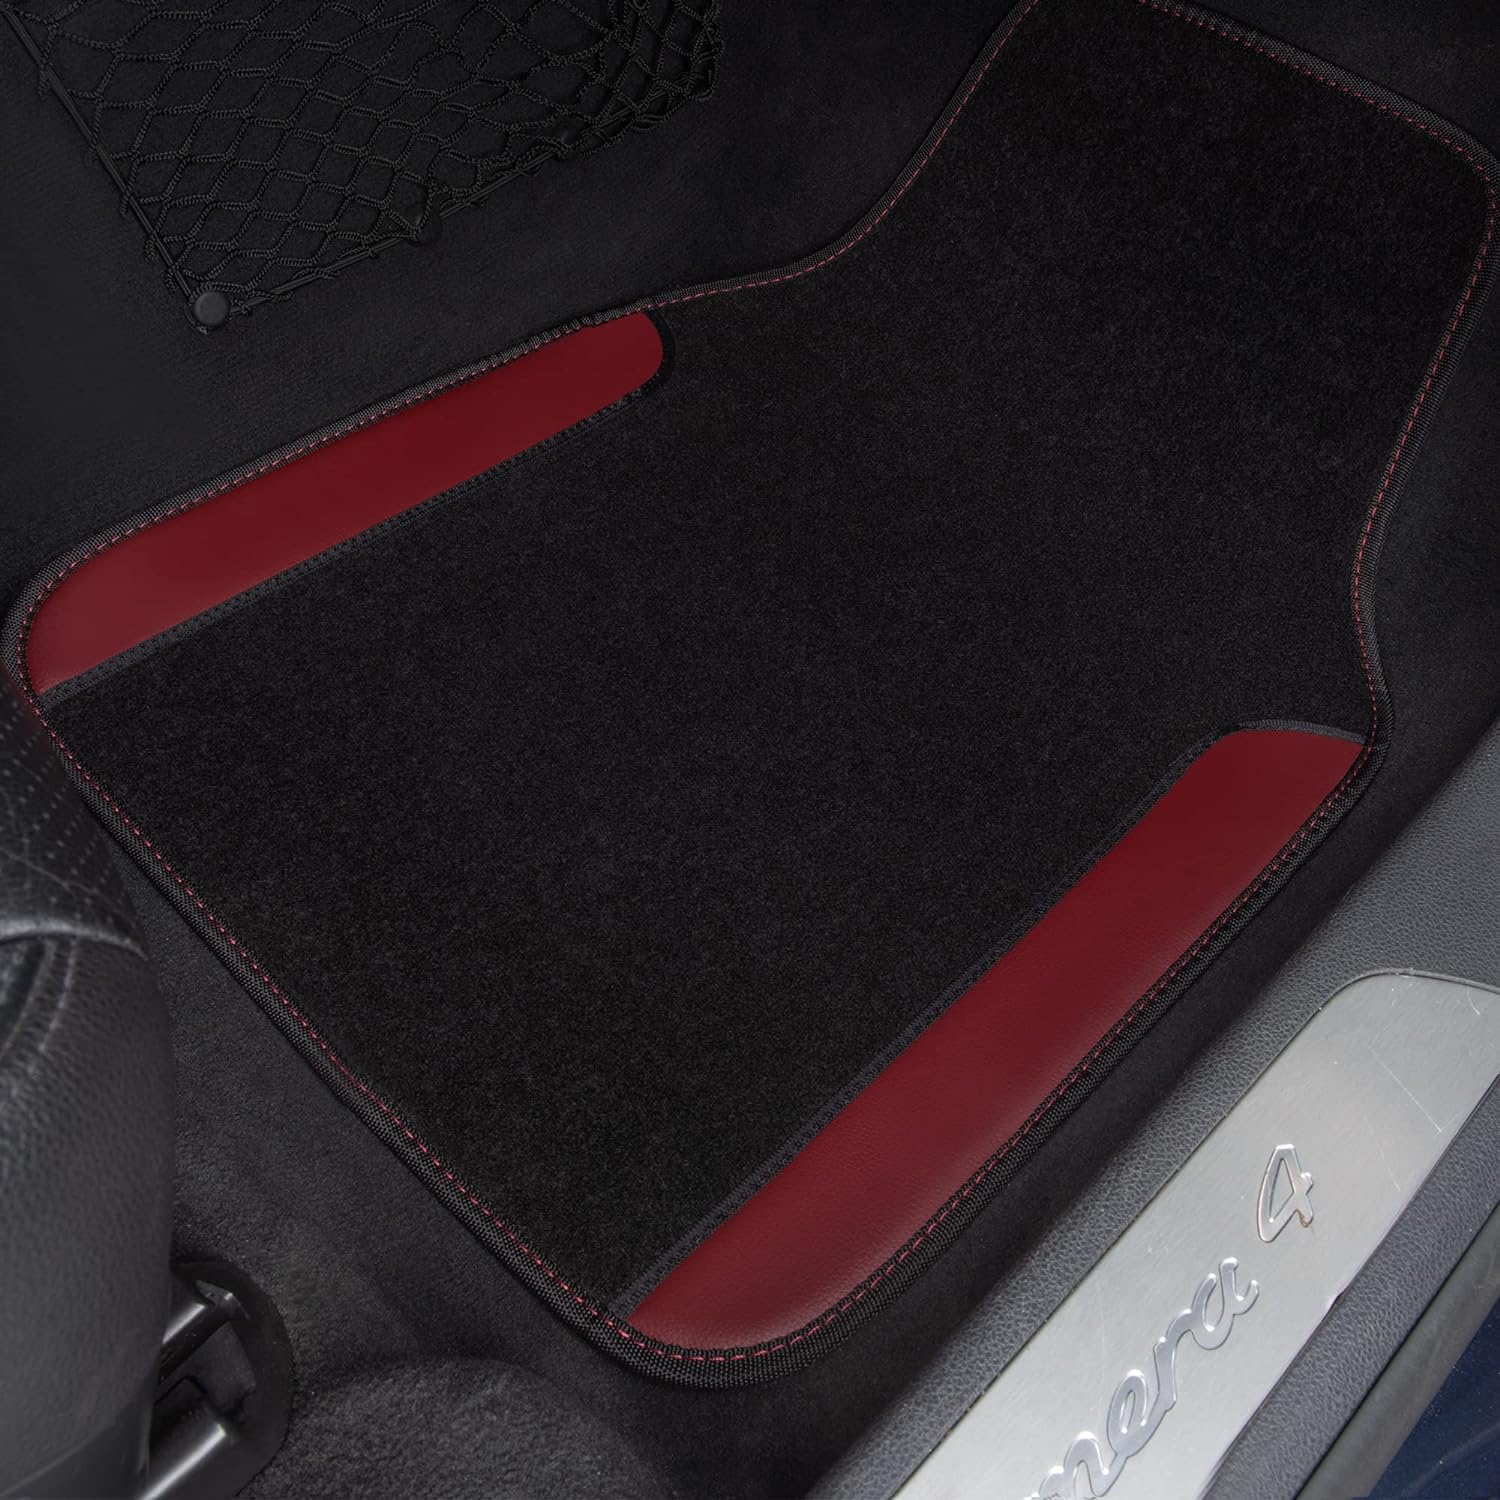 Chameleon Lumbar Support Nappa Leather Seat Covers Full Set